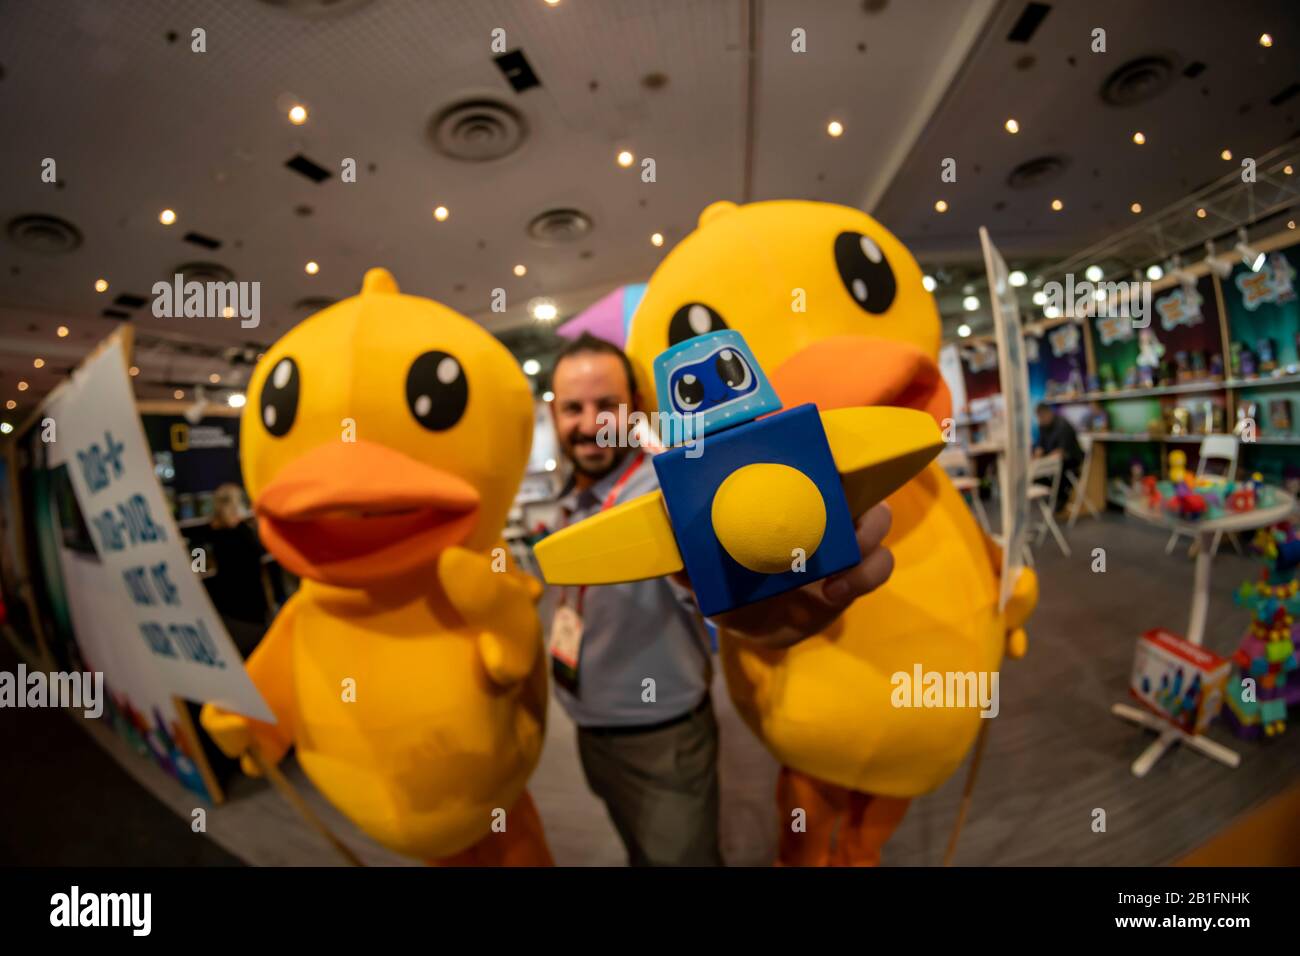 Jordan Willing, inventor of Blockaroos poses with “out of work” rubber duckies at the 117th North American International Toy Fair in the Jacob Javits Convention center in New York on Sunday, February 23, 2020. The ducks were protesting their replacement in baths by the Blockaroo toys..  The toy industry generates over $26 billion in the U.S. alone and Toy Fair is the largest toy trade show in the Western Hemisphere. (© Richard B. Levine) Stock Photo